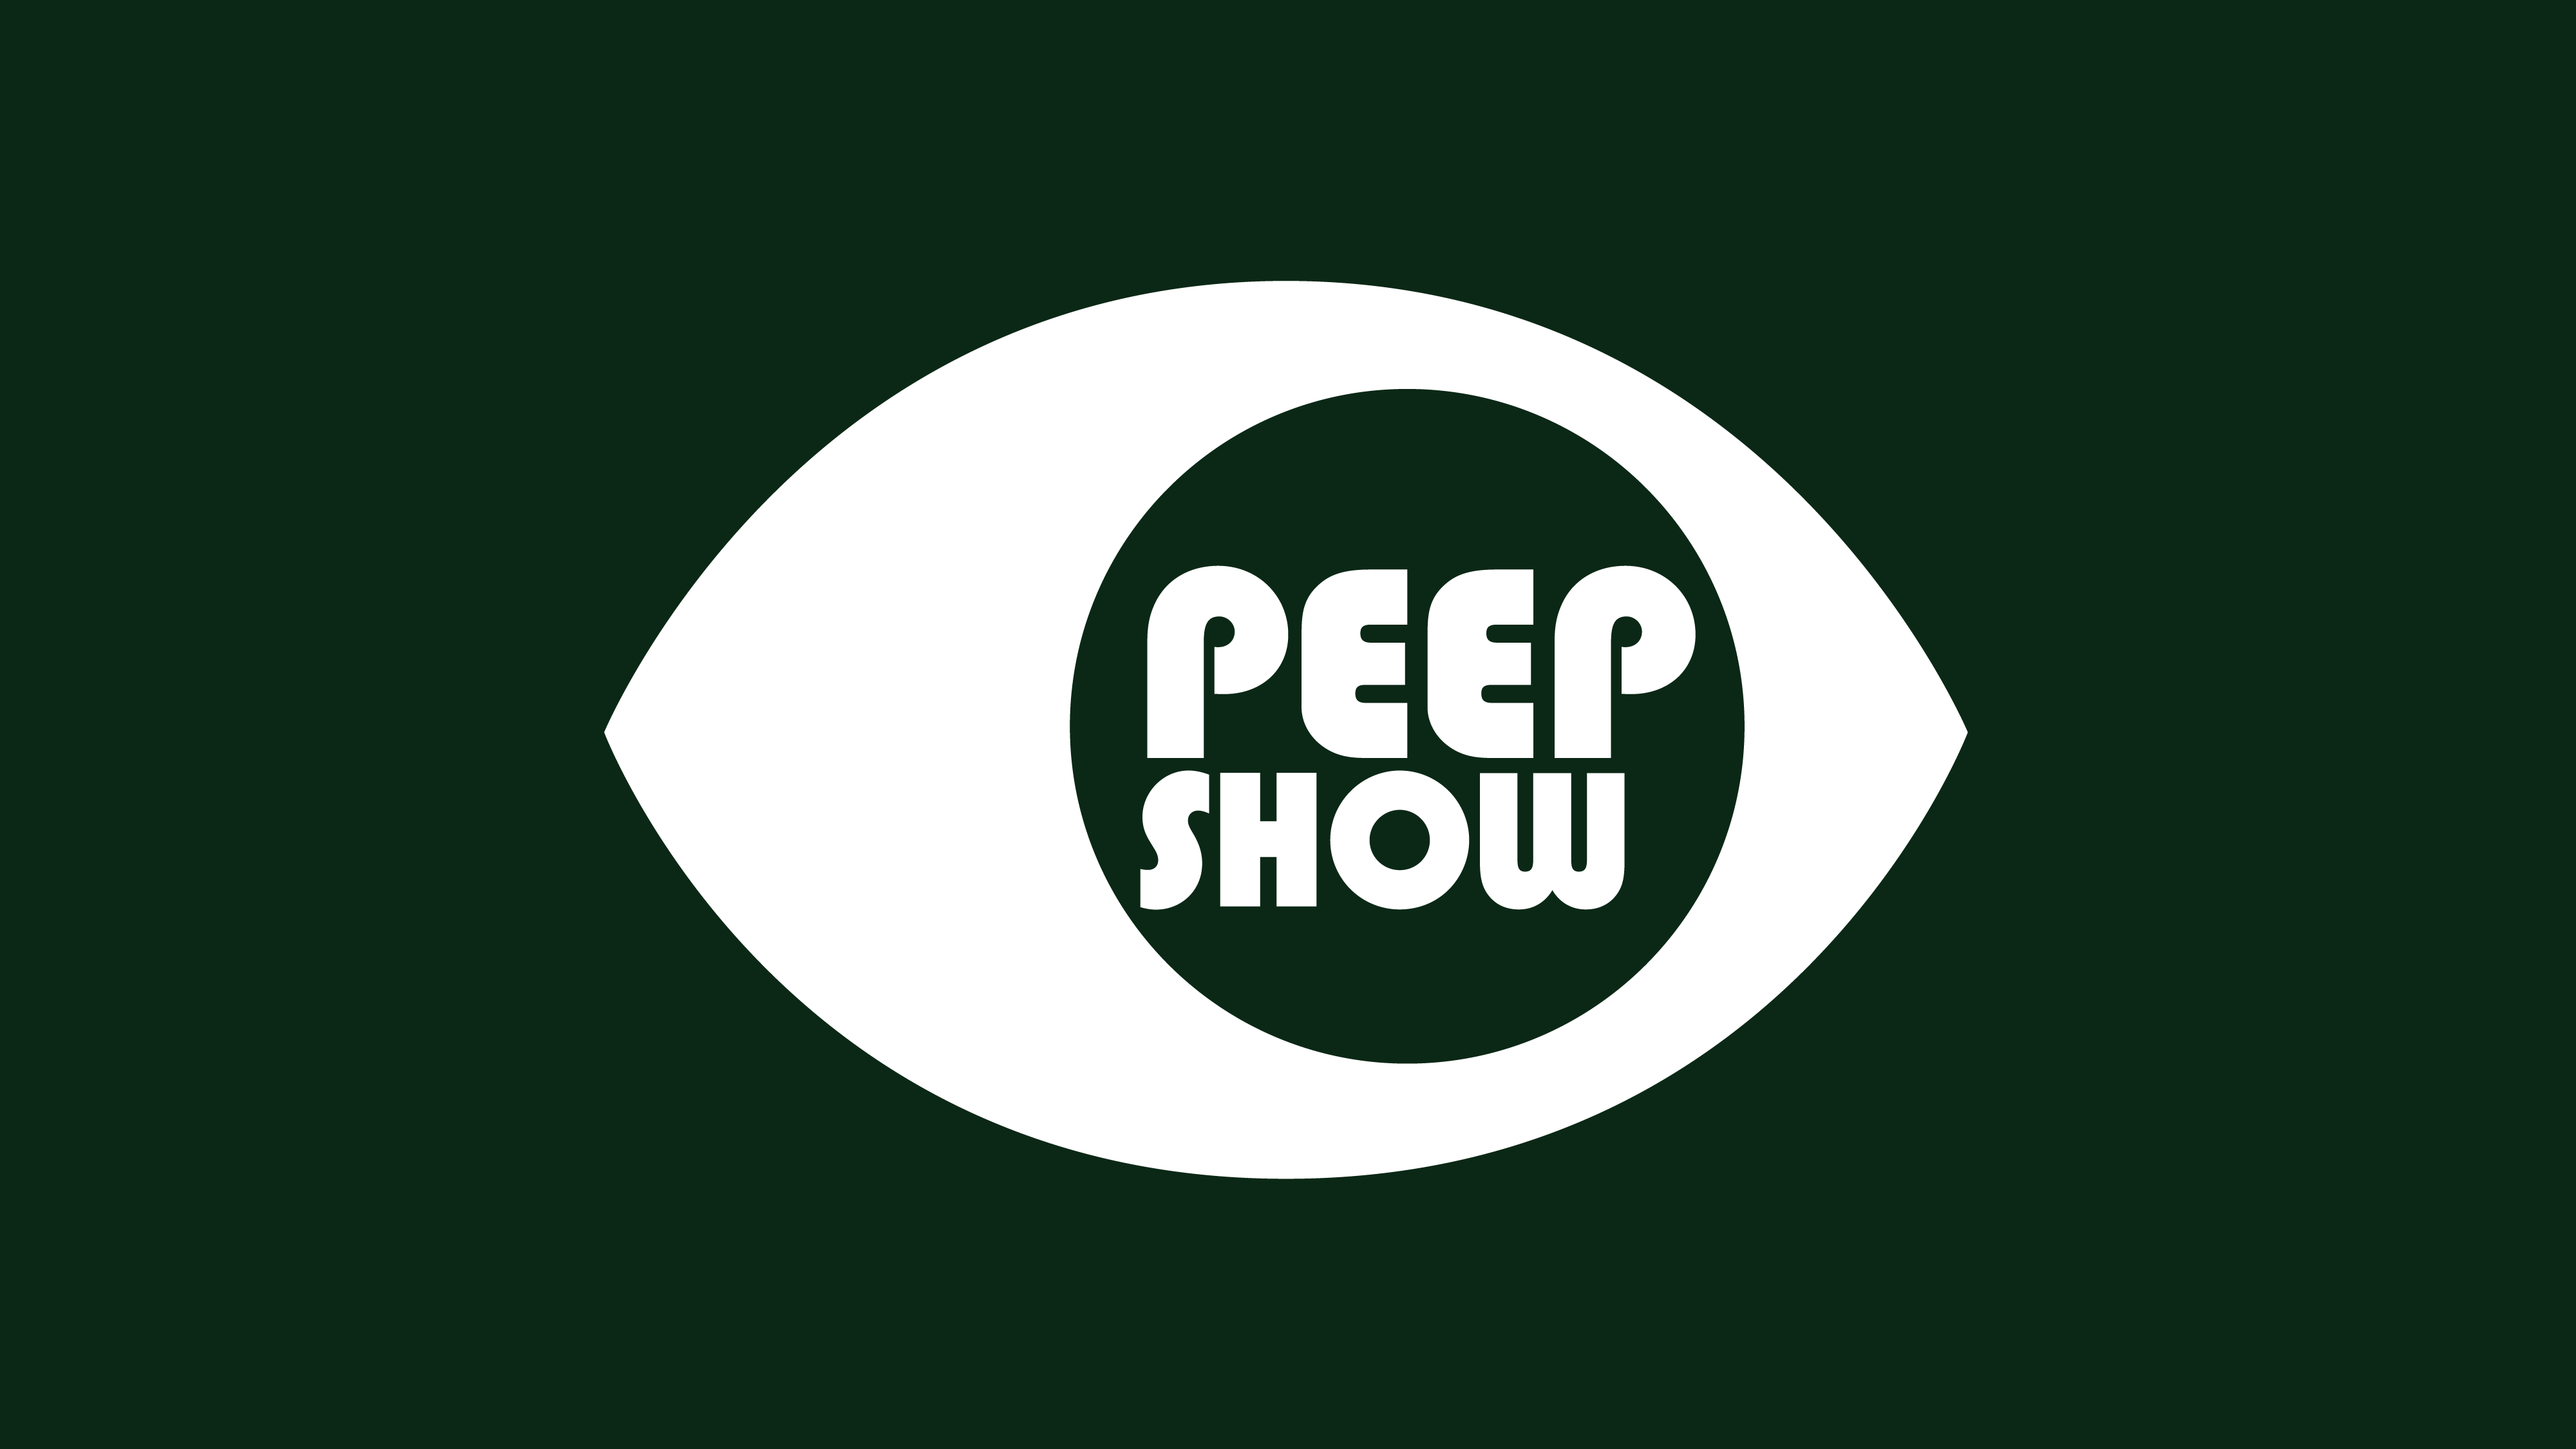 High Resolution Reddit Logo - Made A high-res version of the peepshow logo, as there are no other ...